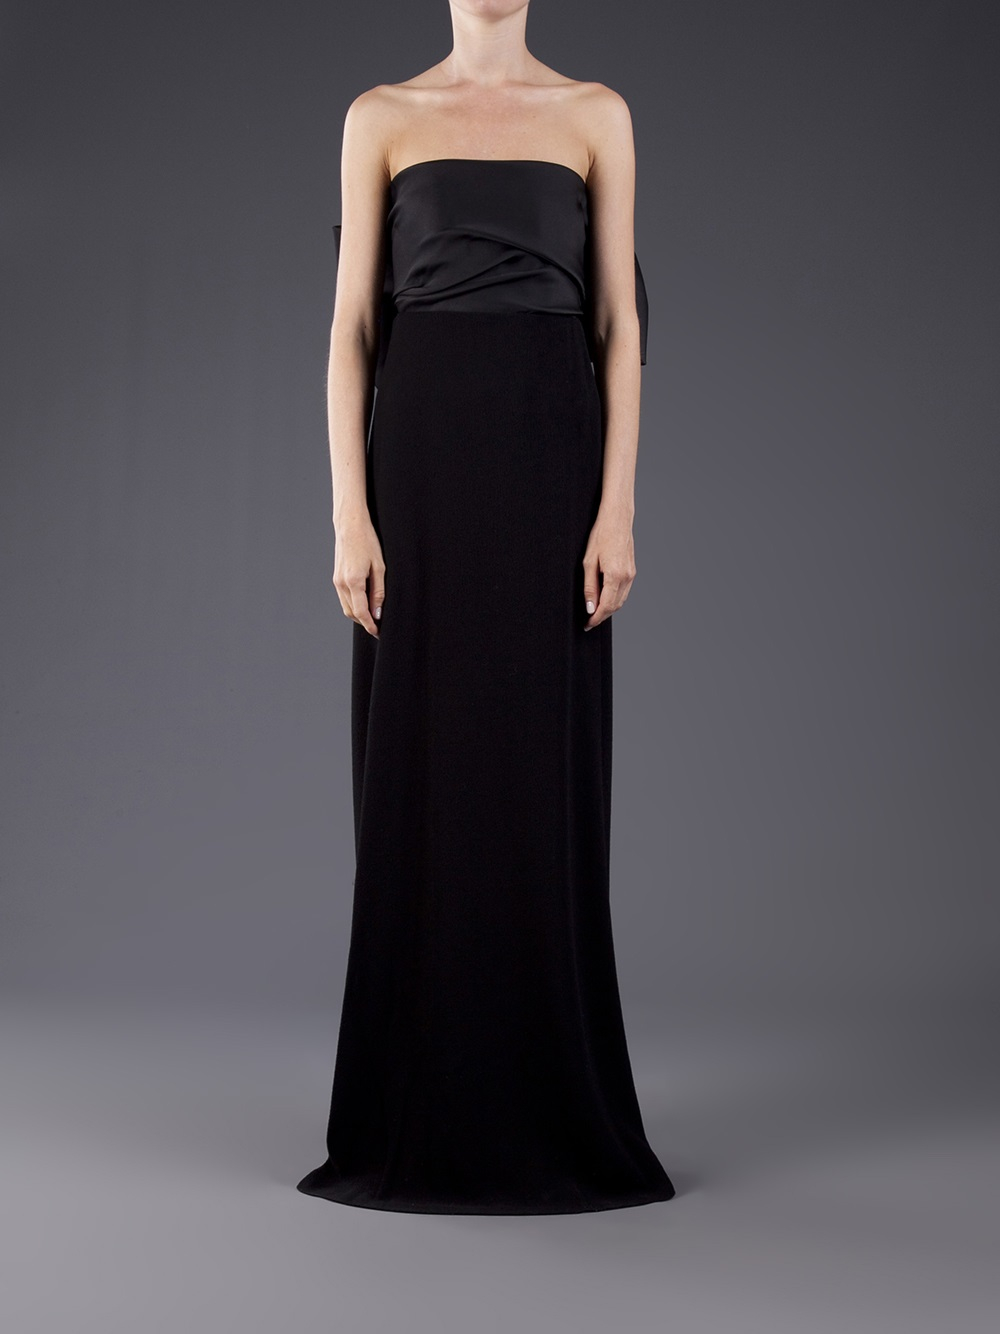 Lanvin Strapless Bow Gown in Black | Lyst